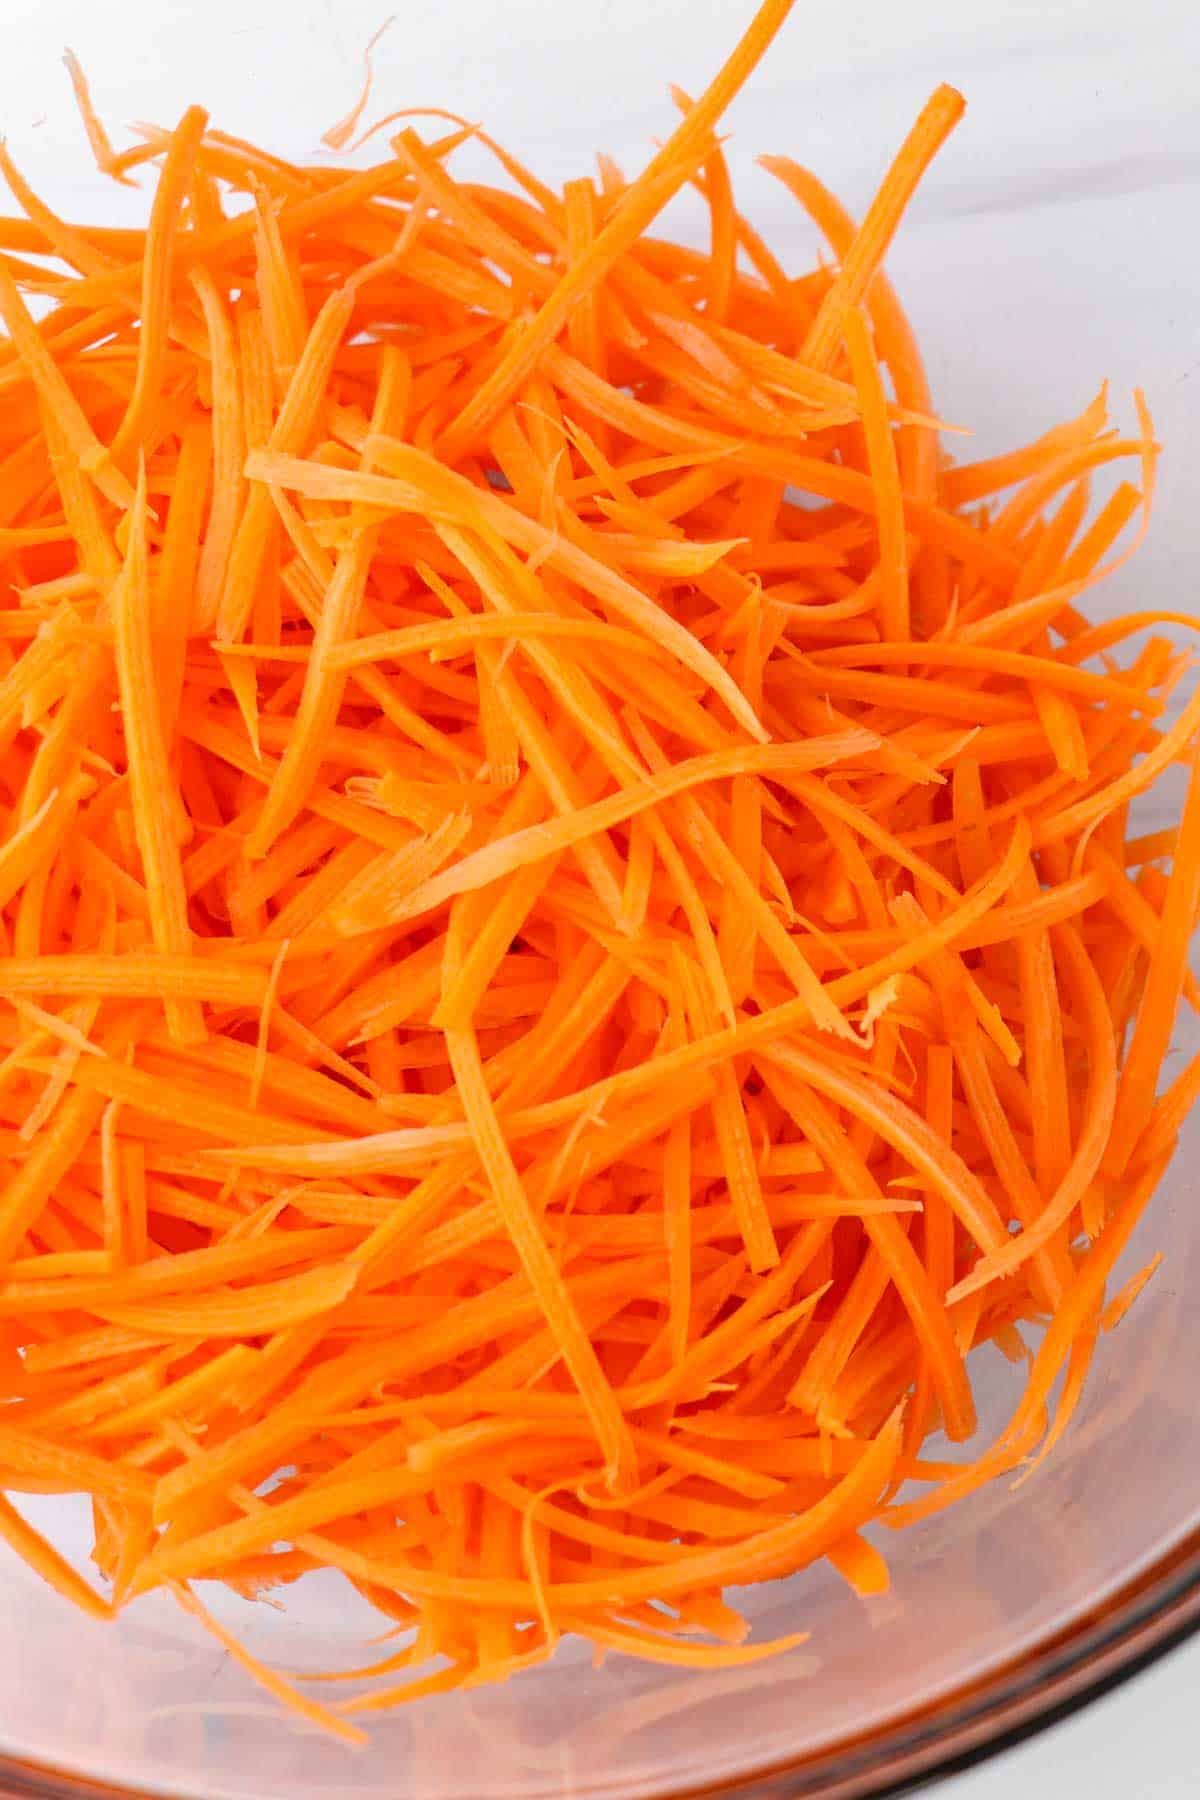 Shredded carrots in a glass bowl.